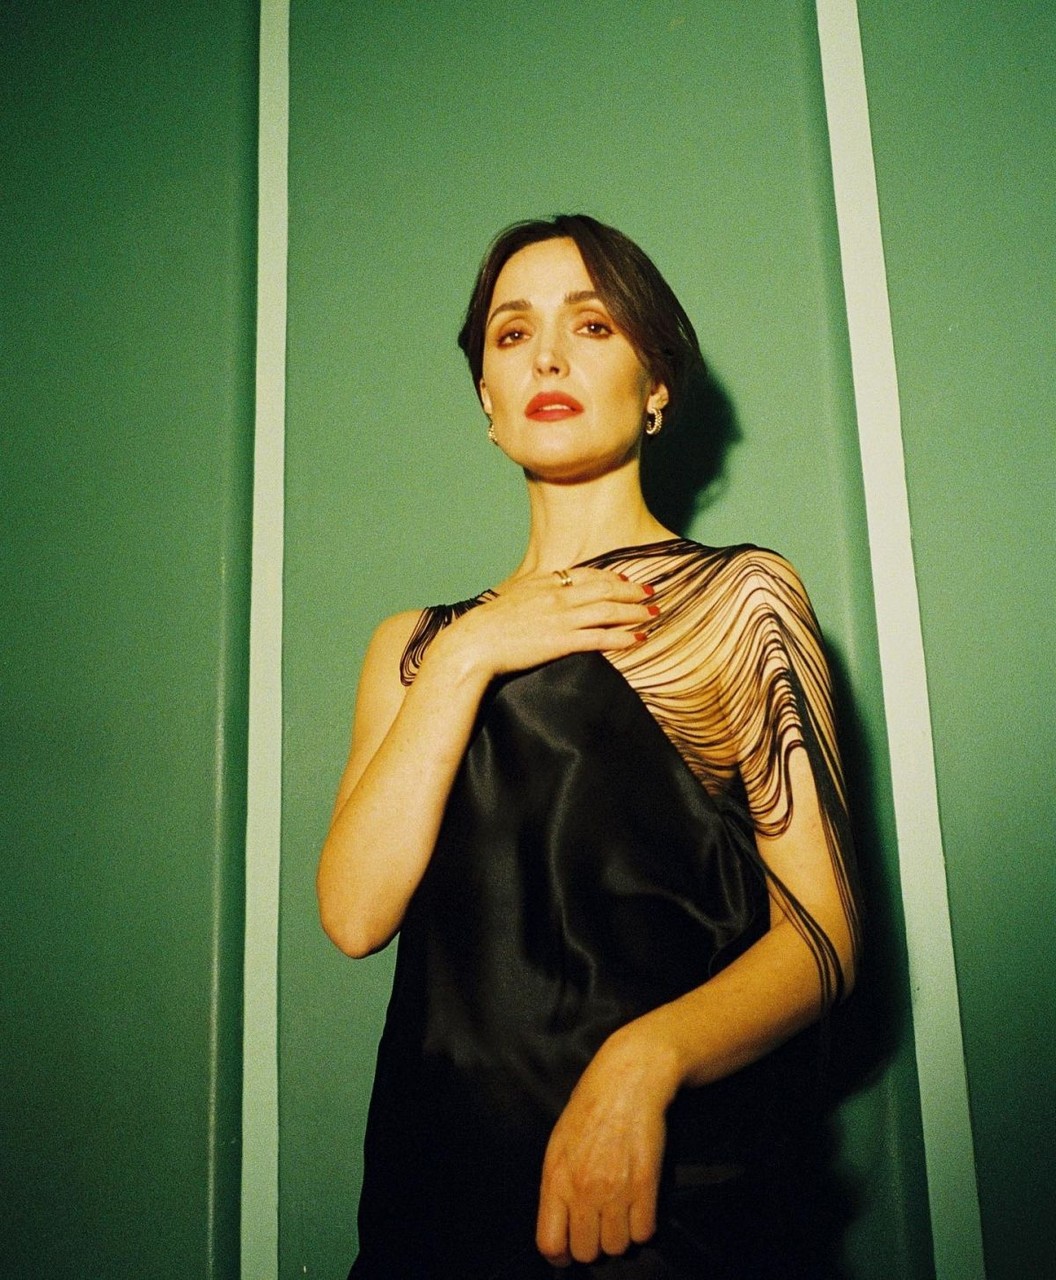 Rose Byrne For Amazing Magazine Debut Issue